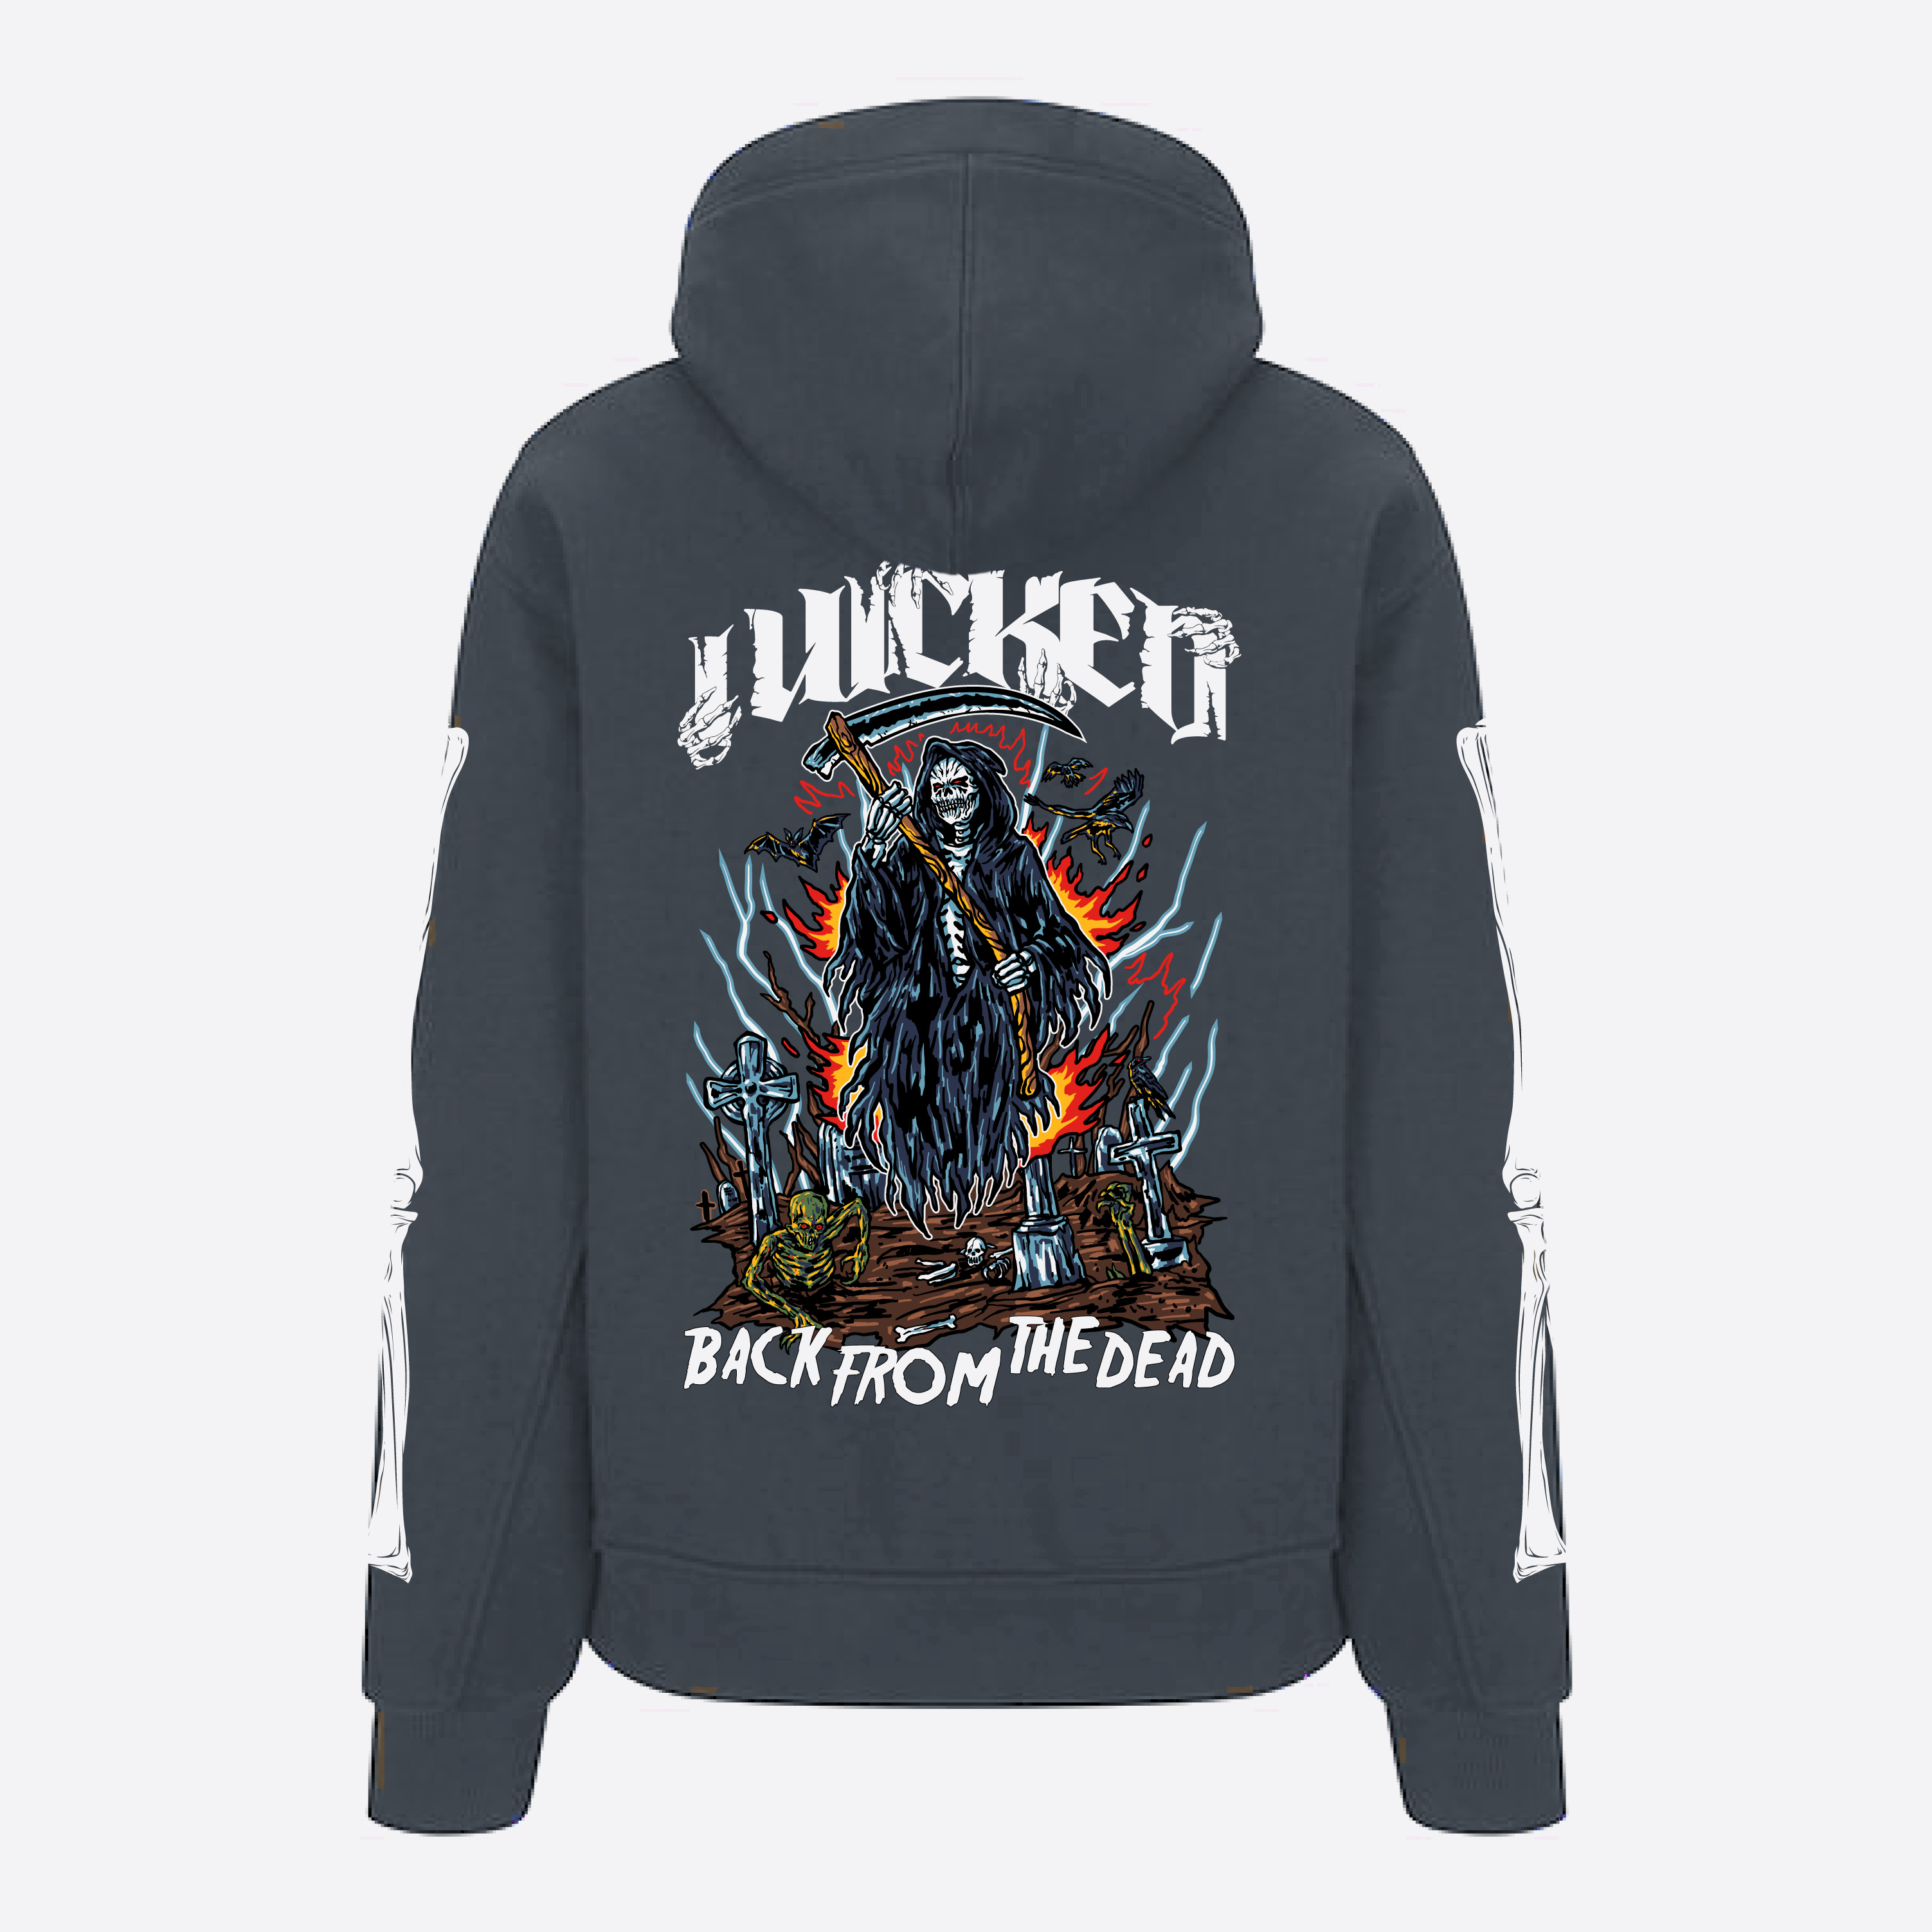 "BACK FROM THE DEAD" HOODIE (DOLPHIN BLUE)